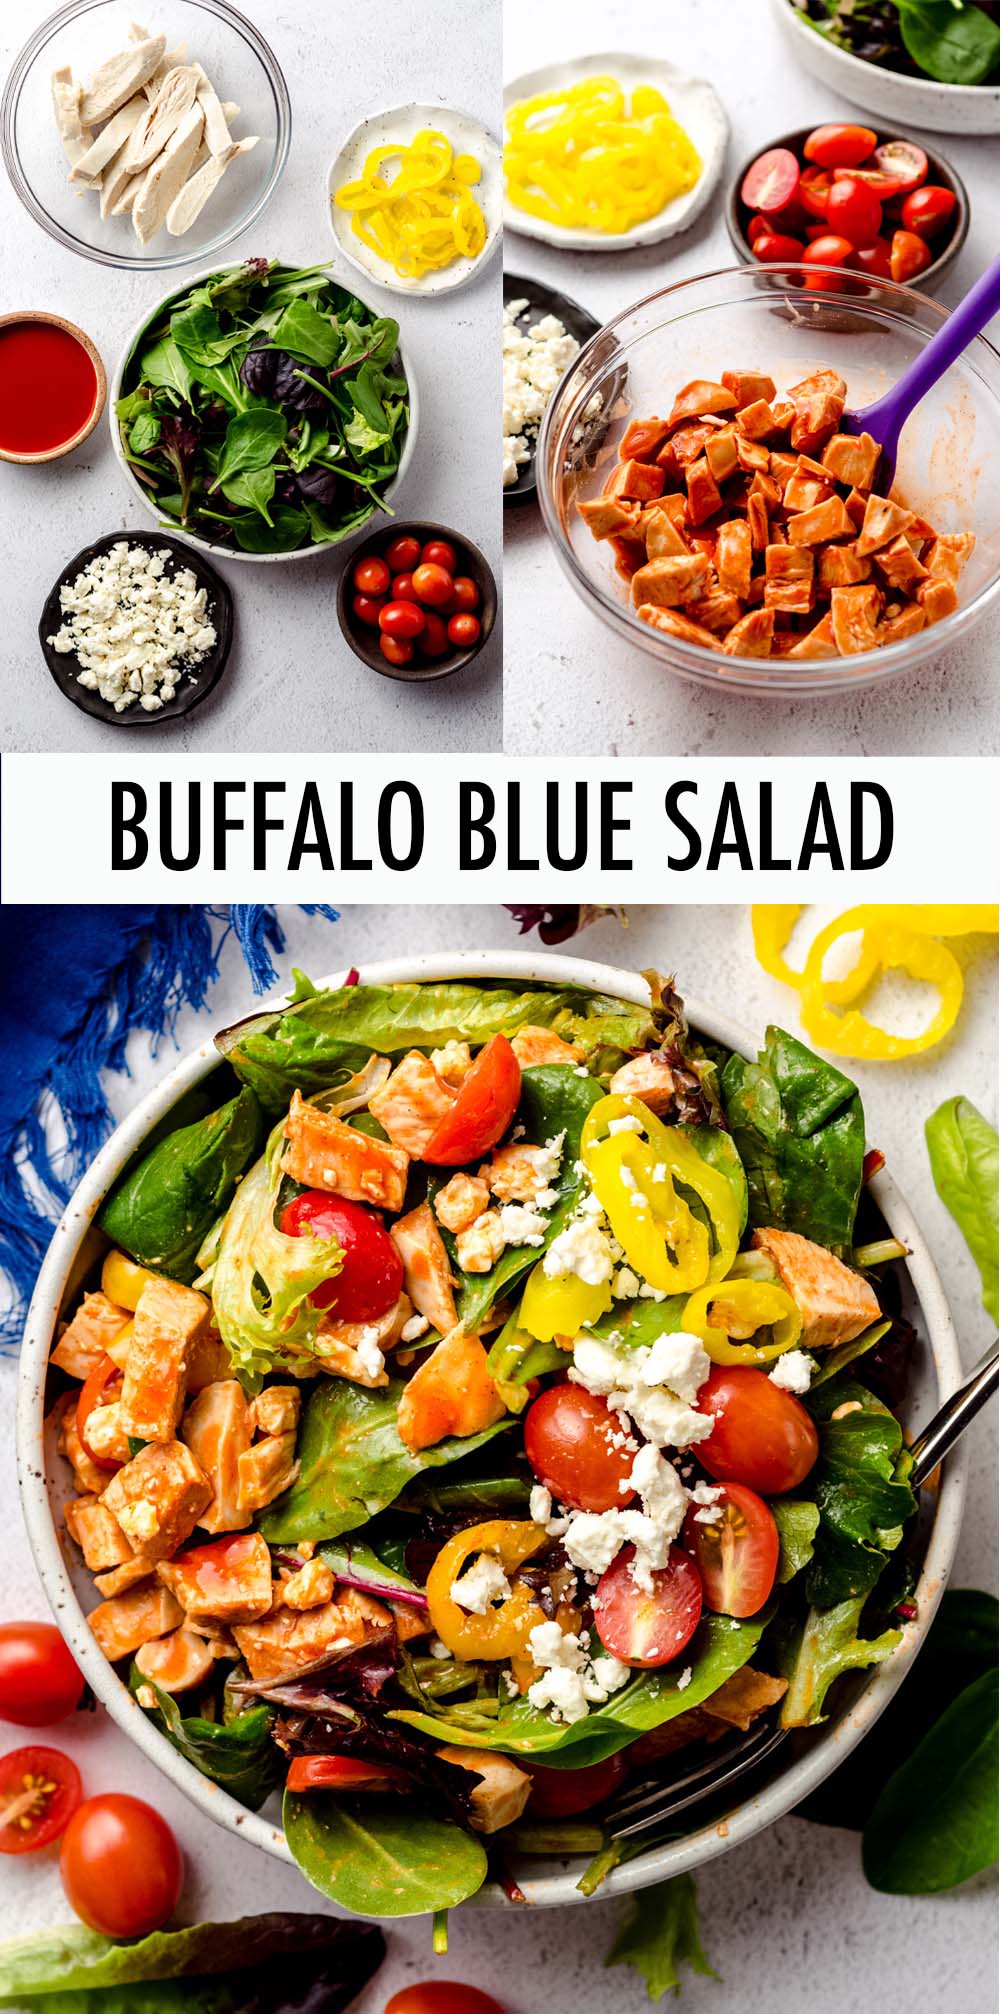 Buffalo Blue Salad: This protein-packed salad features spicy buffalo chicken, crisp banana peppers, juicy grape tomatoes, and tangy blue cheese crumbles. via @frshaprilflours